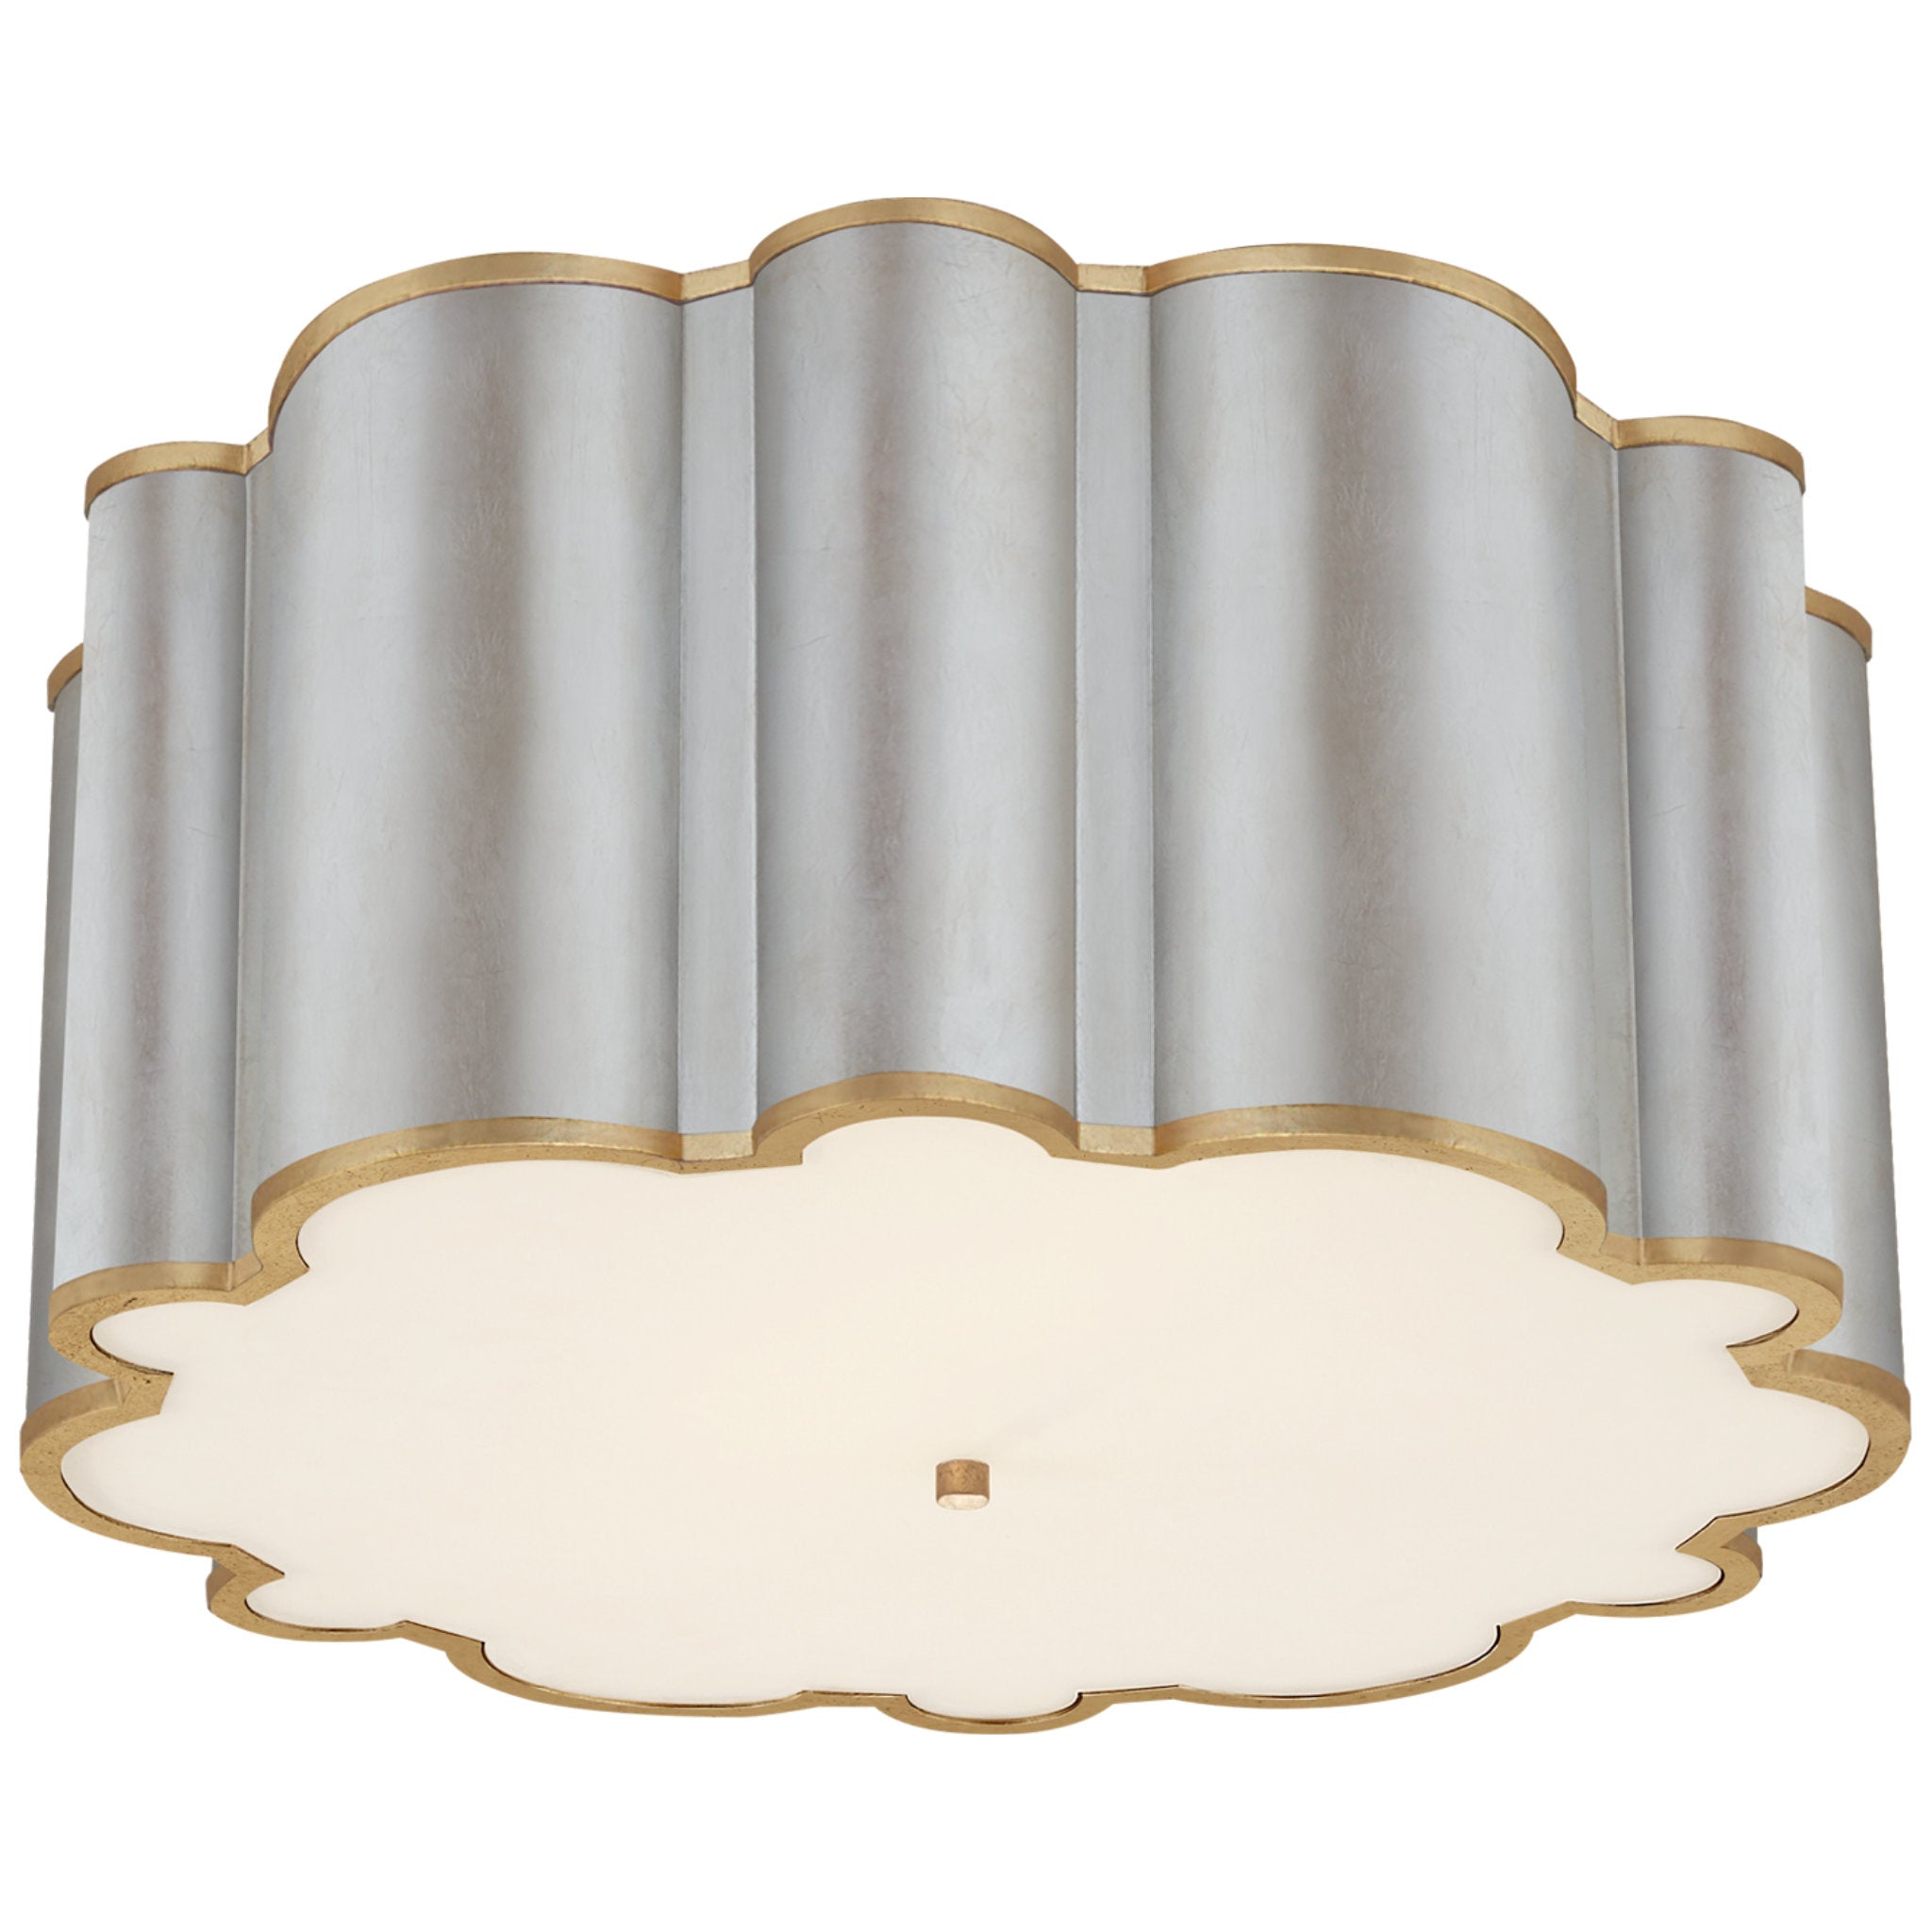 Alexa Hampton Markos Grande Flush Mount in Burnished Silver Leaf and Gild with Frosted Acrylic